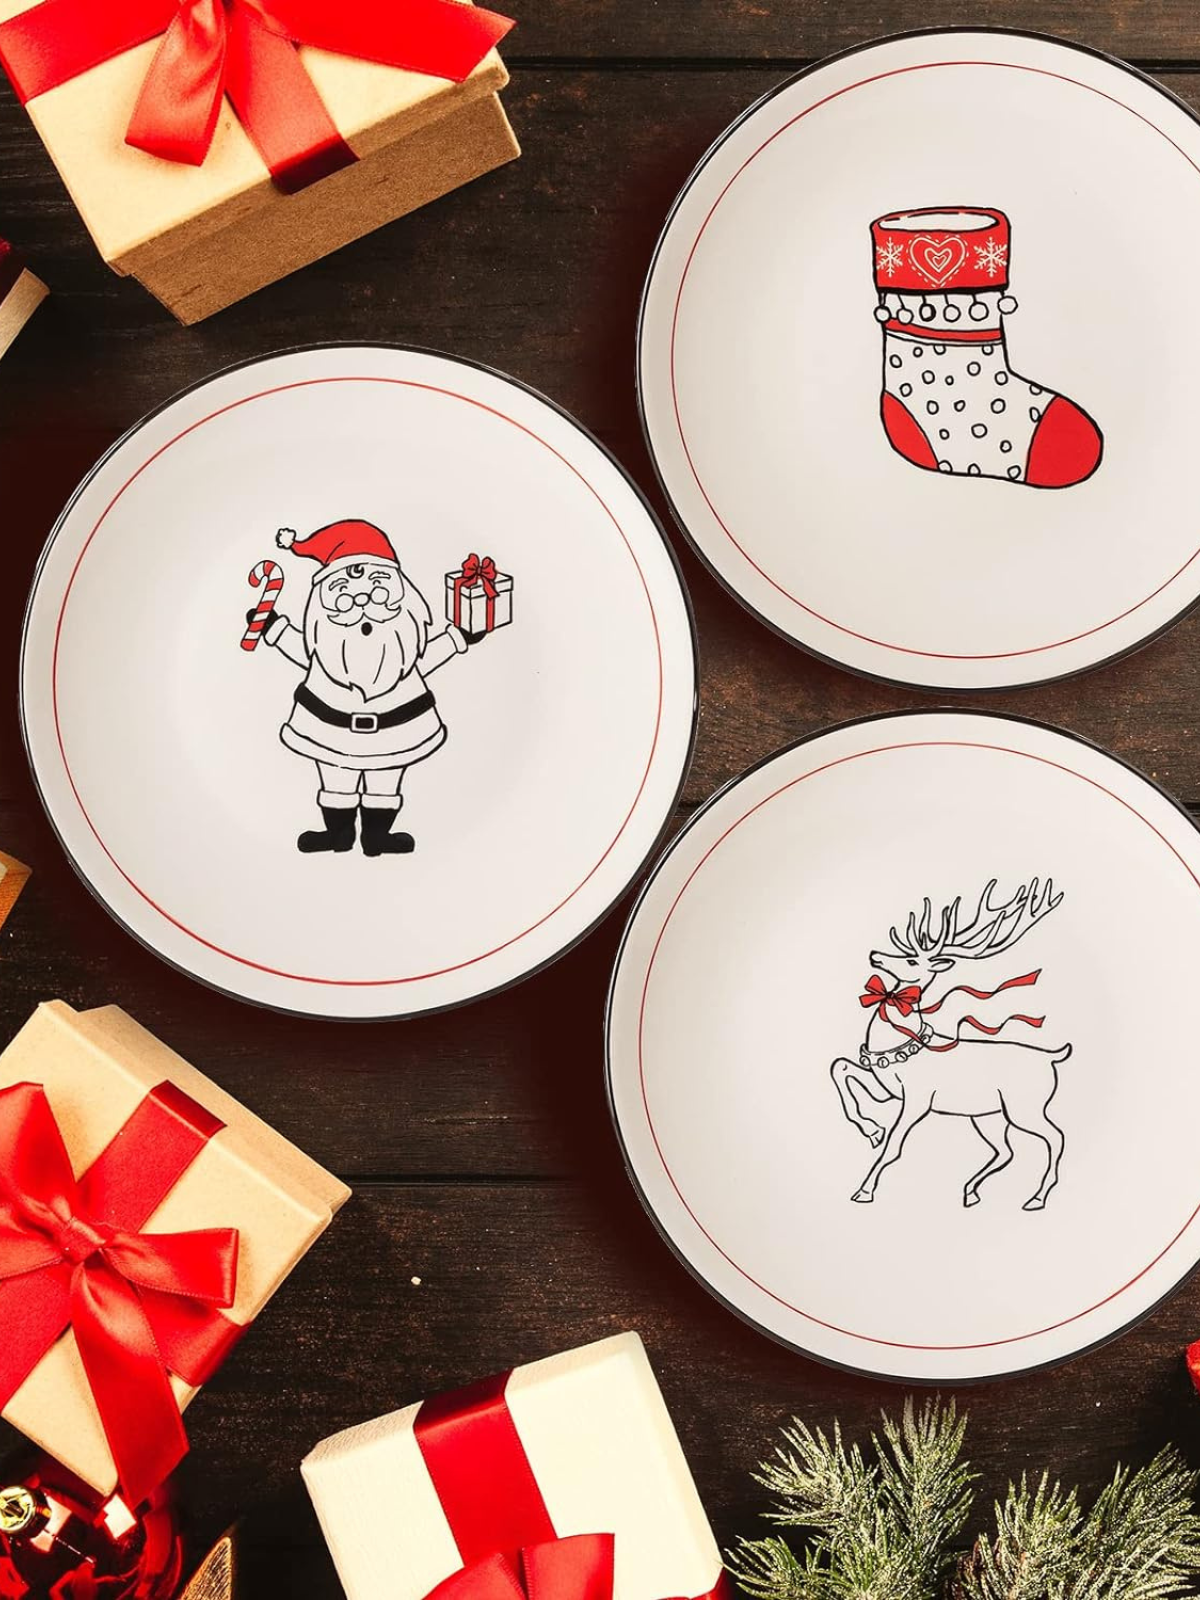 Christmas Plates Set of 6 – 8.5 Inch Christmas Theme Holiday Ceramic Salad/Dessert Plate, Ceramic Dinner Plates for Salad, Cake and Appetizer, Dishwasher and Microwave safe, Assorted Design